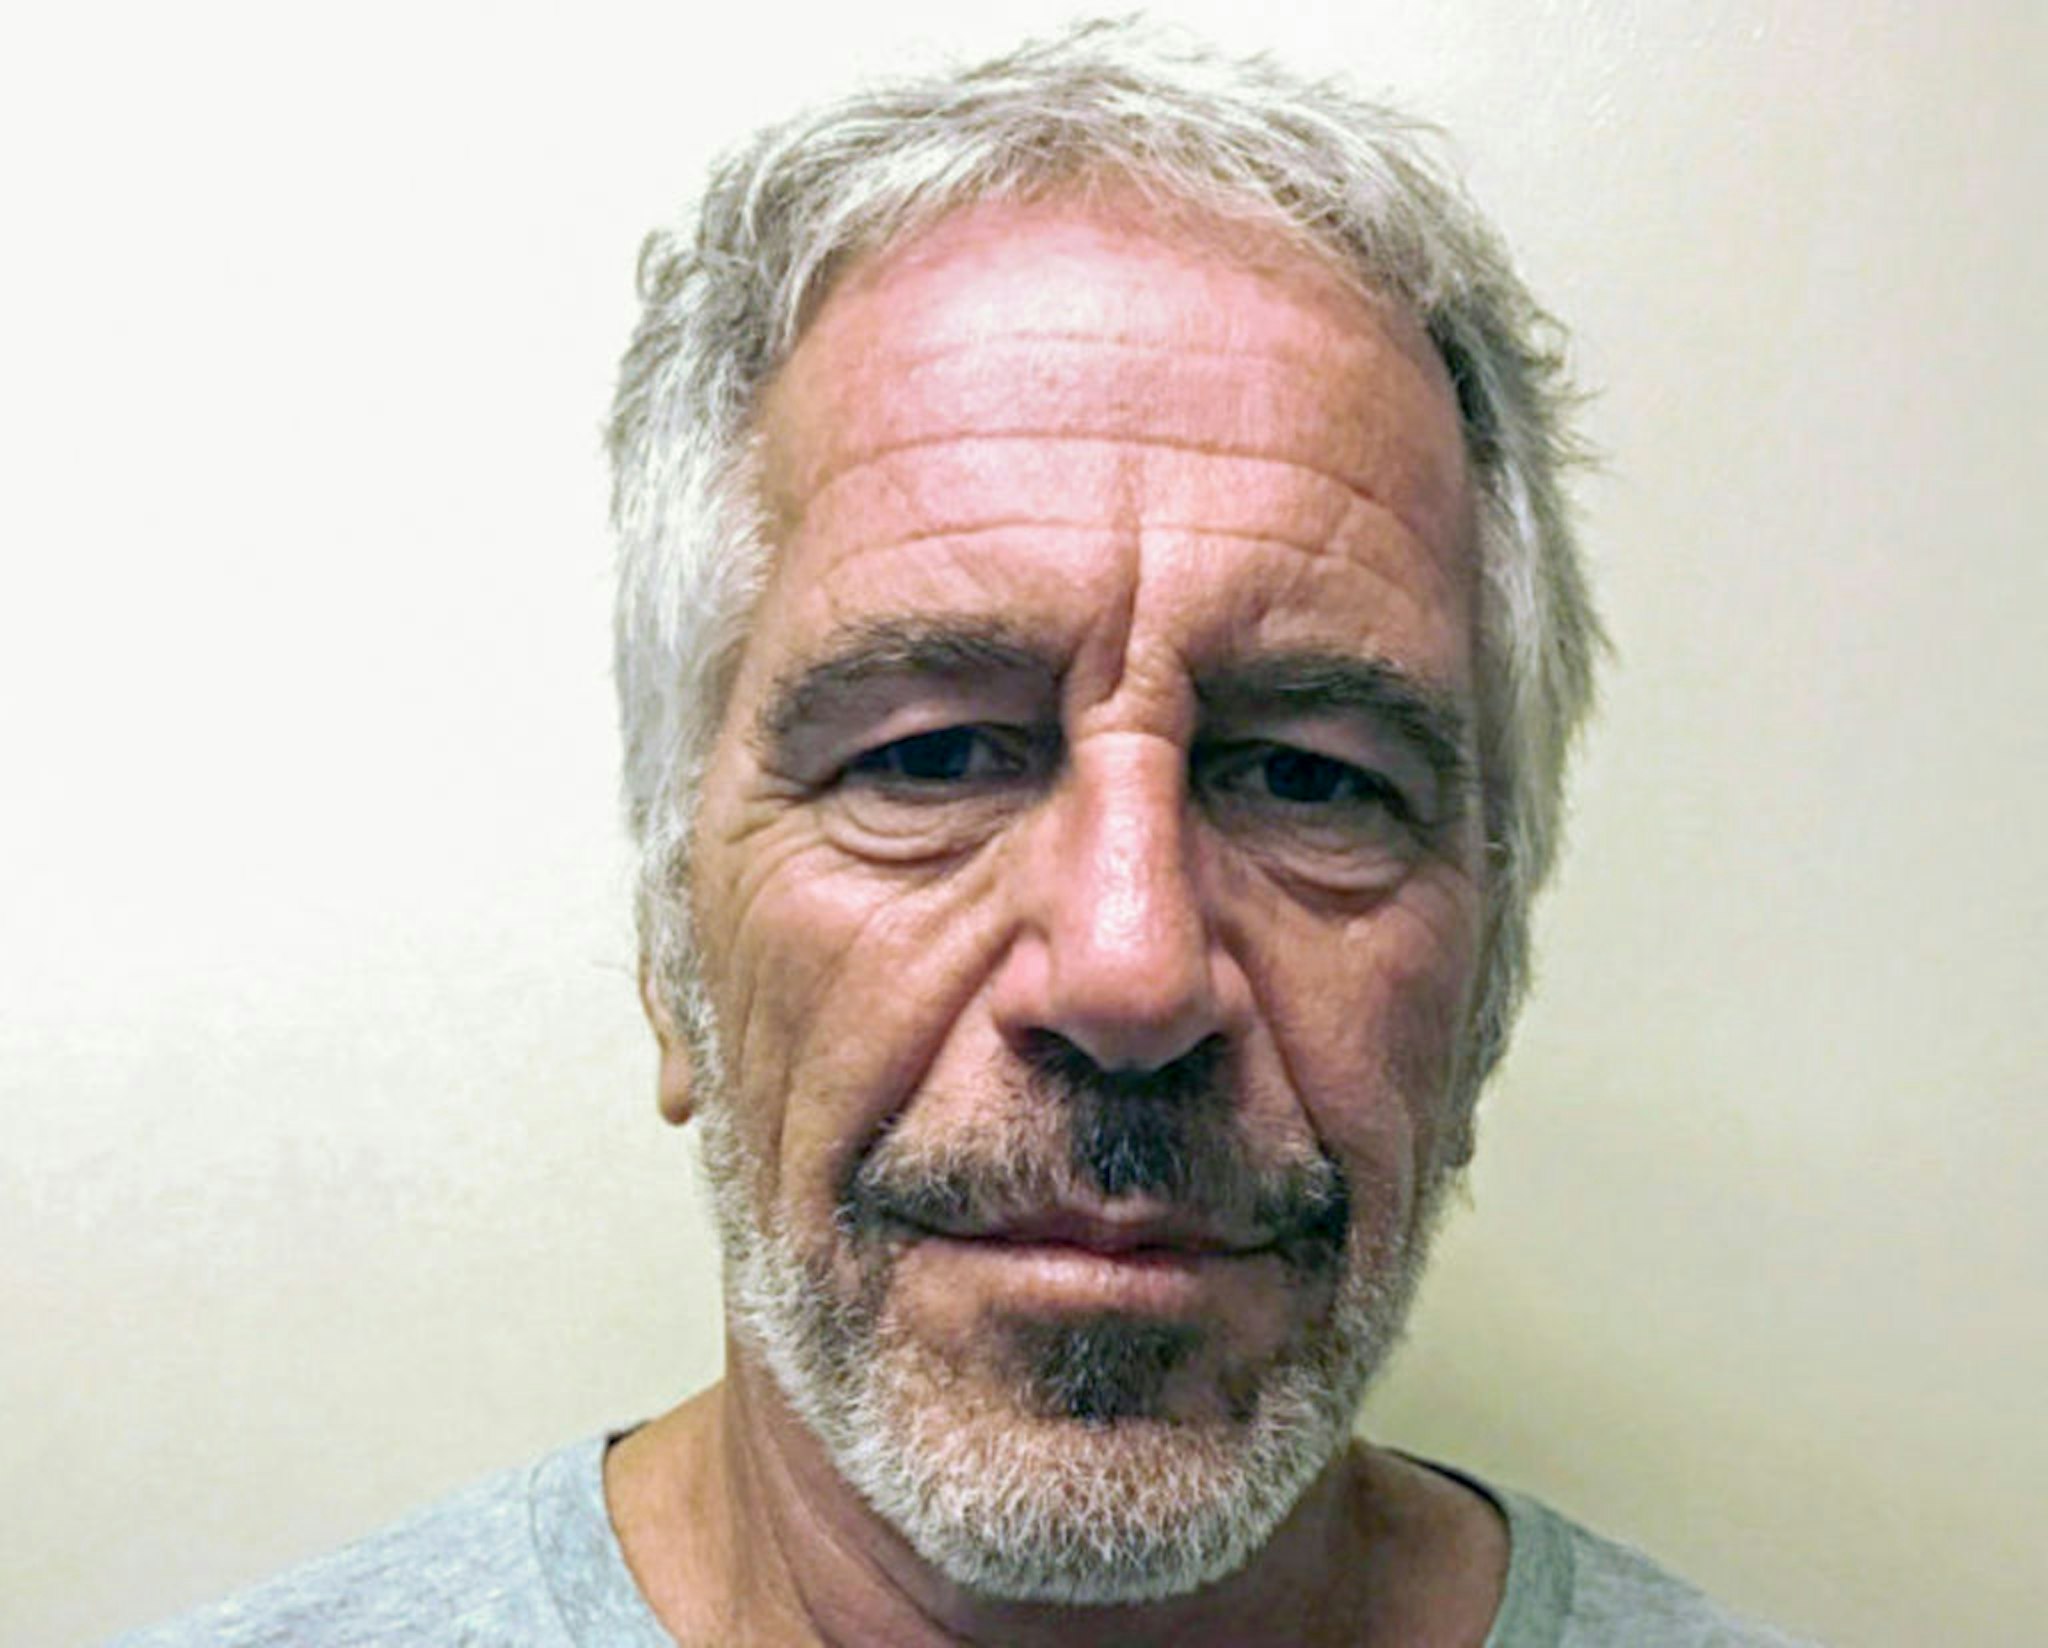 In this handout, the mug shot of Jeffrey Epstein, 2019. (Photo by Kypros/Getty Images)